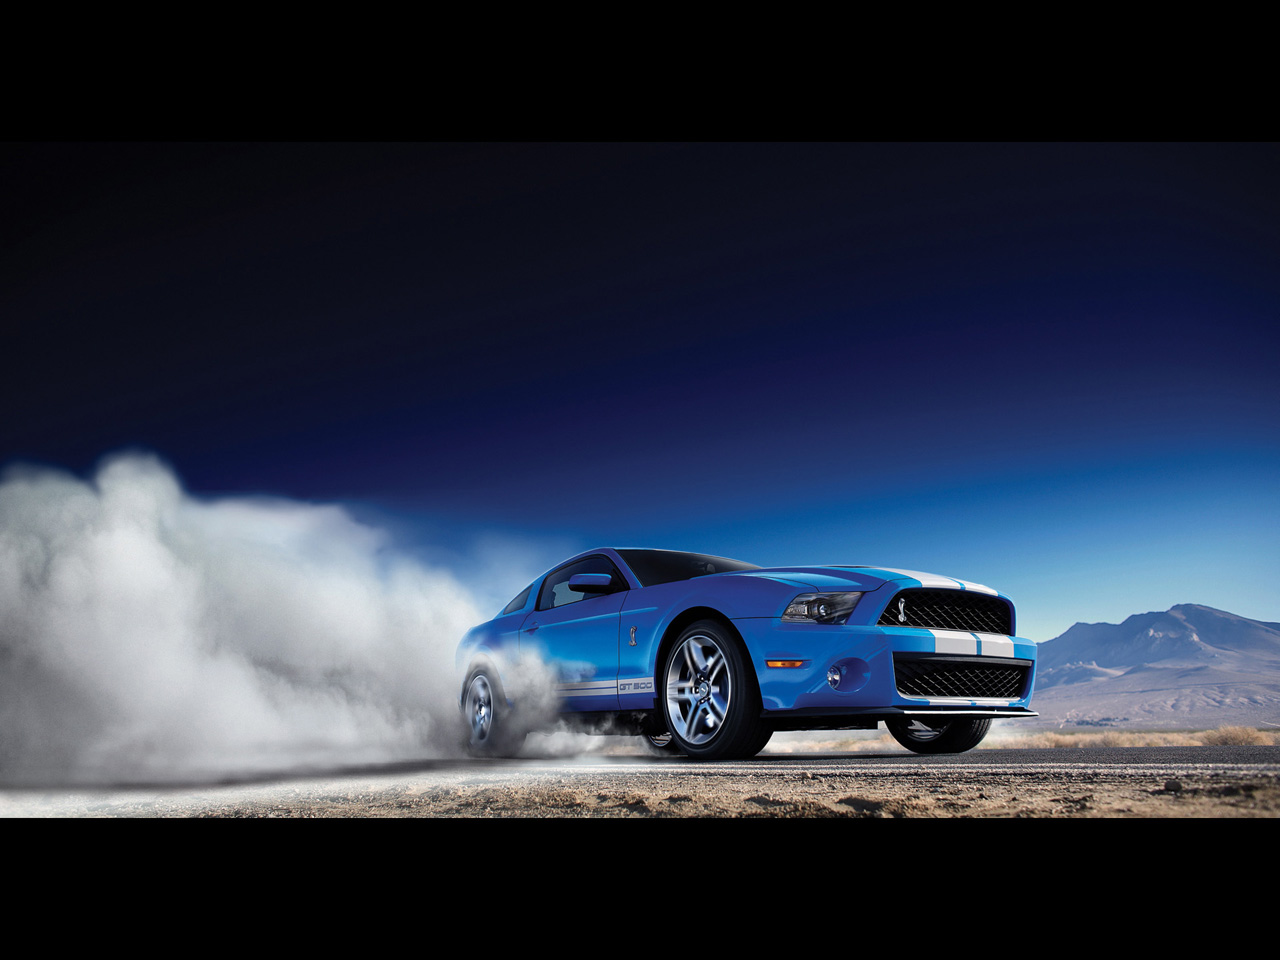  2012 Ford Shelby GT500  2012-Ford-Shelby-GT500-Front-Angle-Smoke-2-1280x960